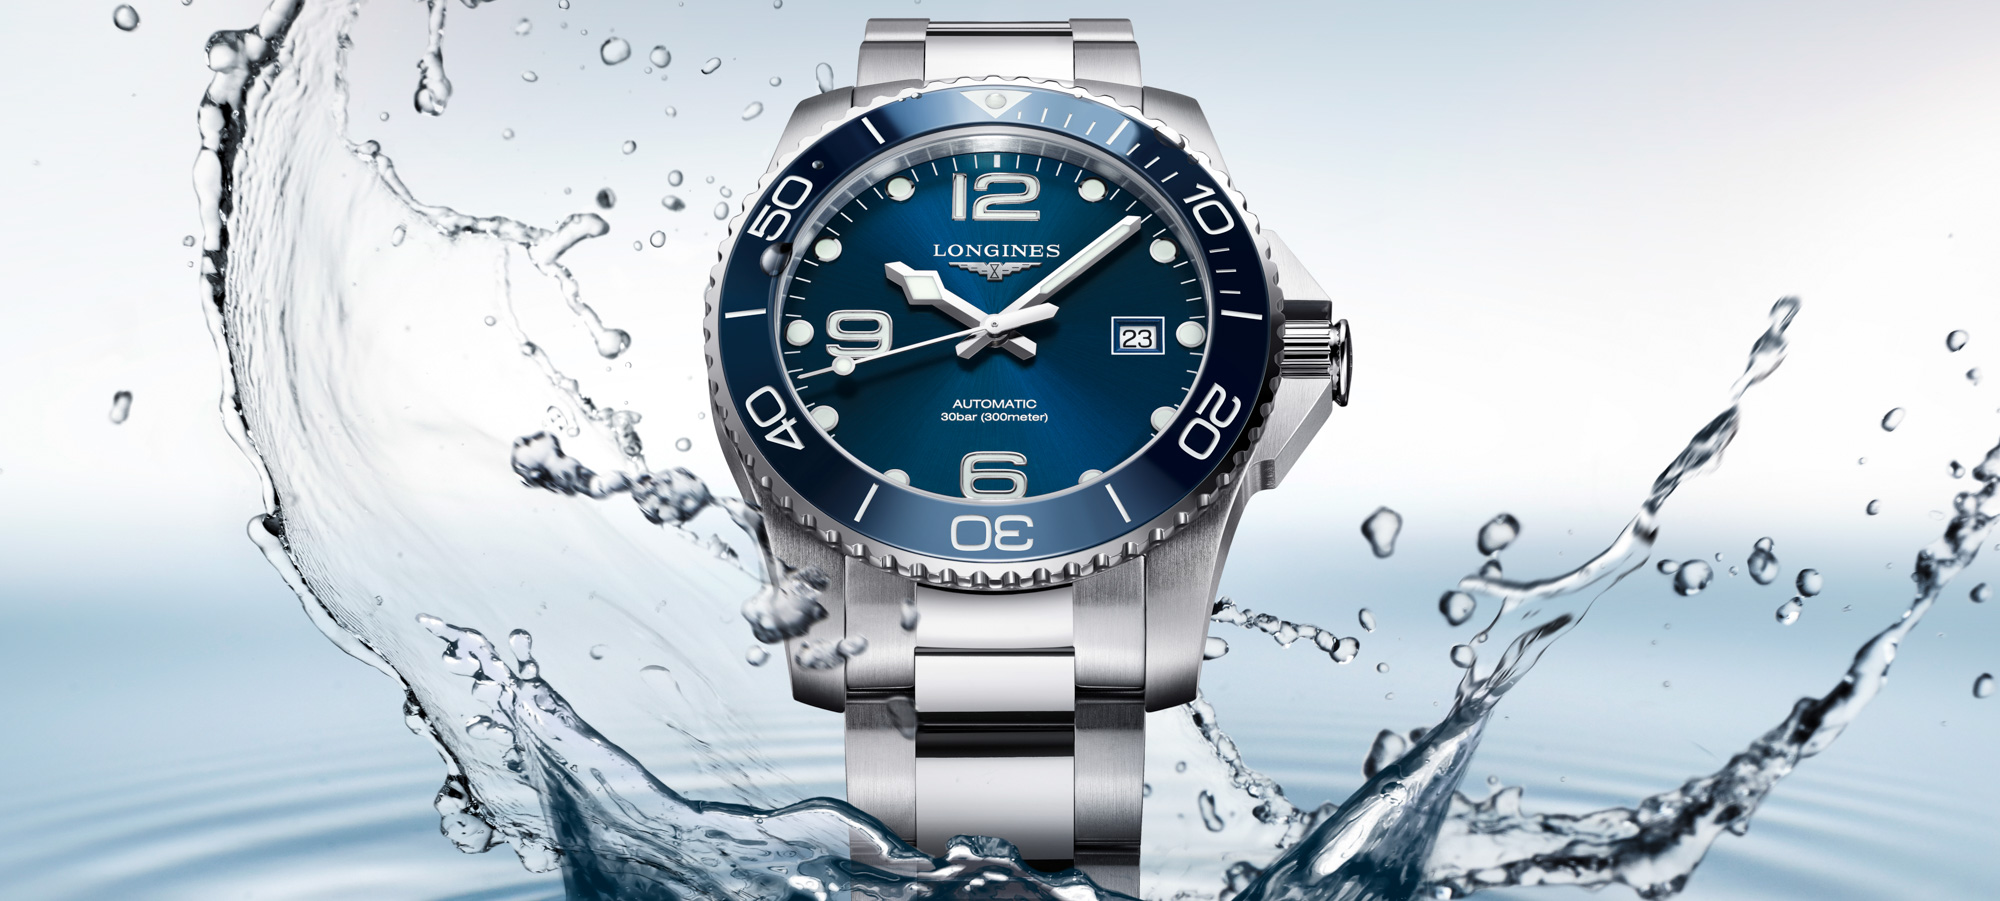 Longines Presents Watch Gift Guide Just In Time For The Holidays aBlogtoWatch